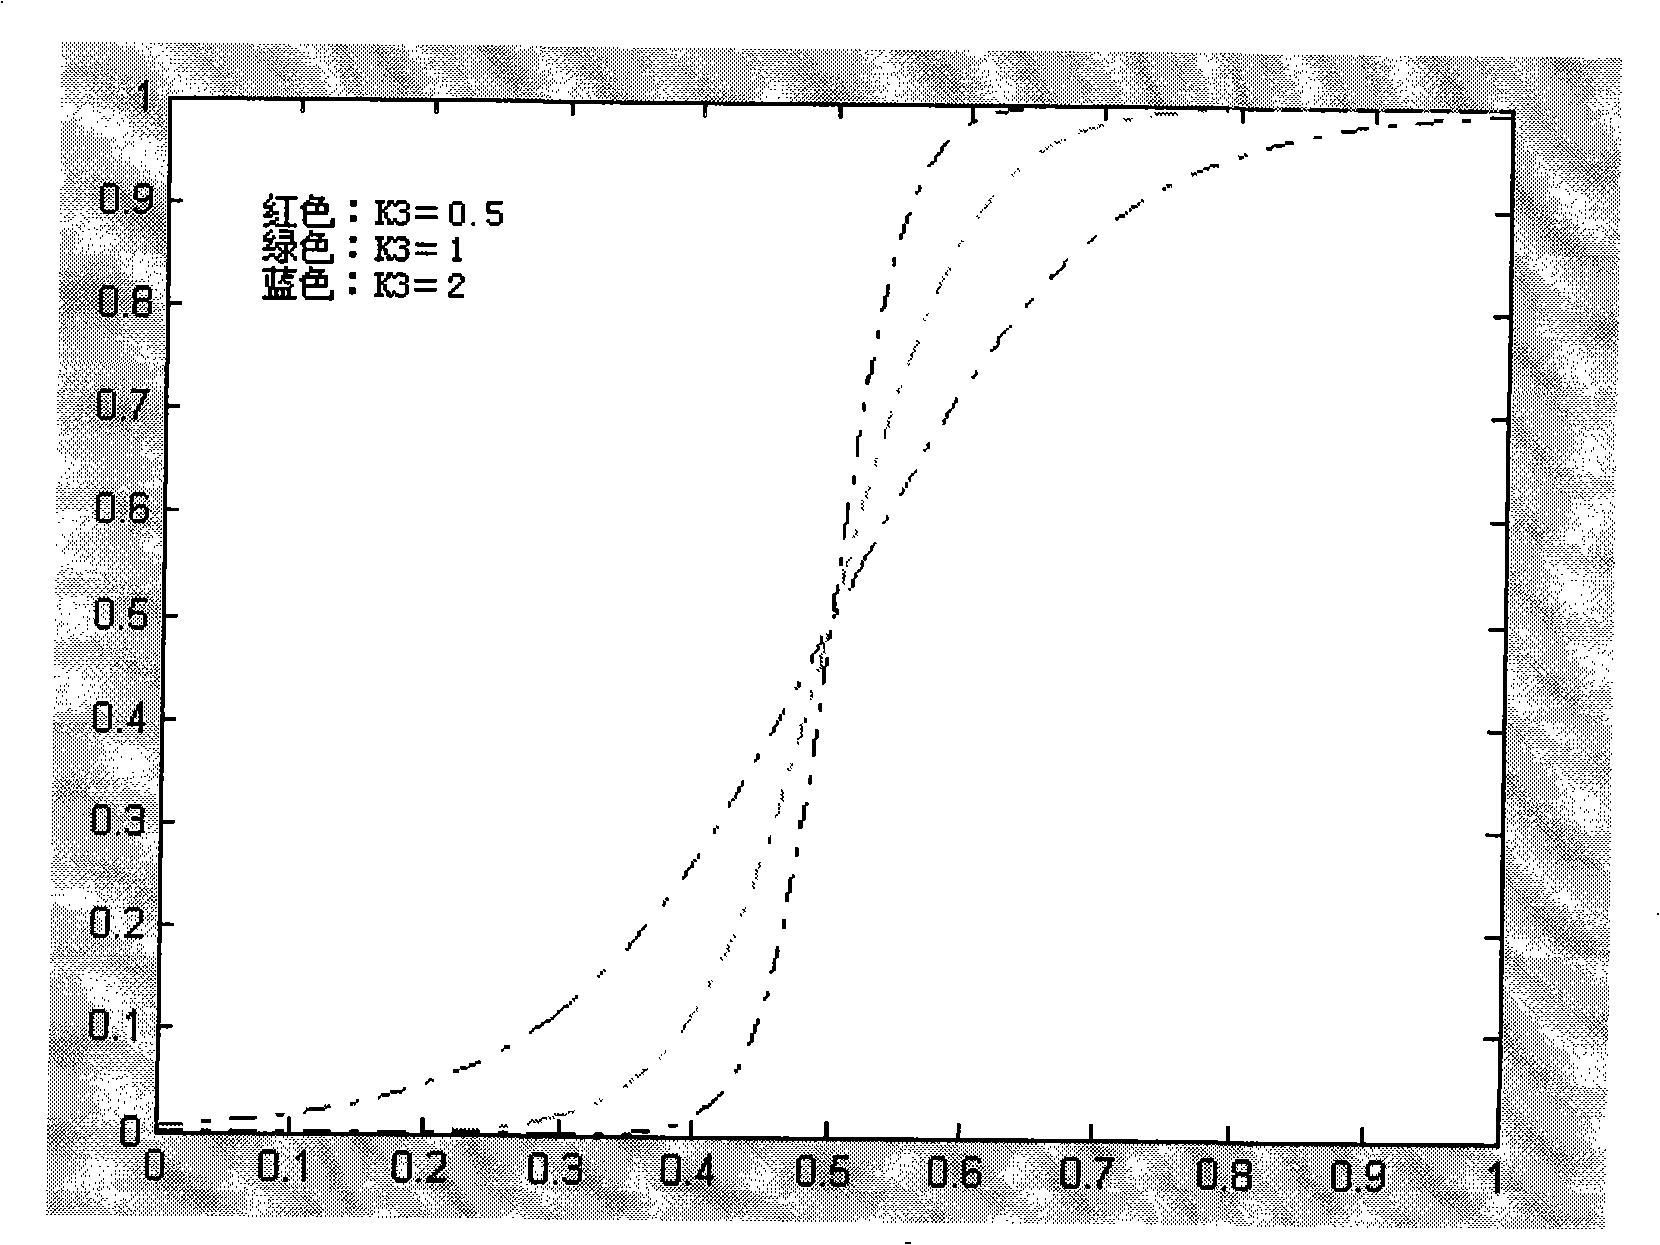 Method for rapidly reinforcing color image based on Retinex theory